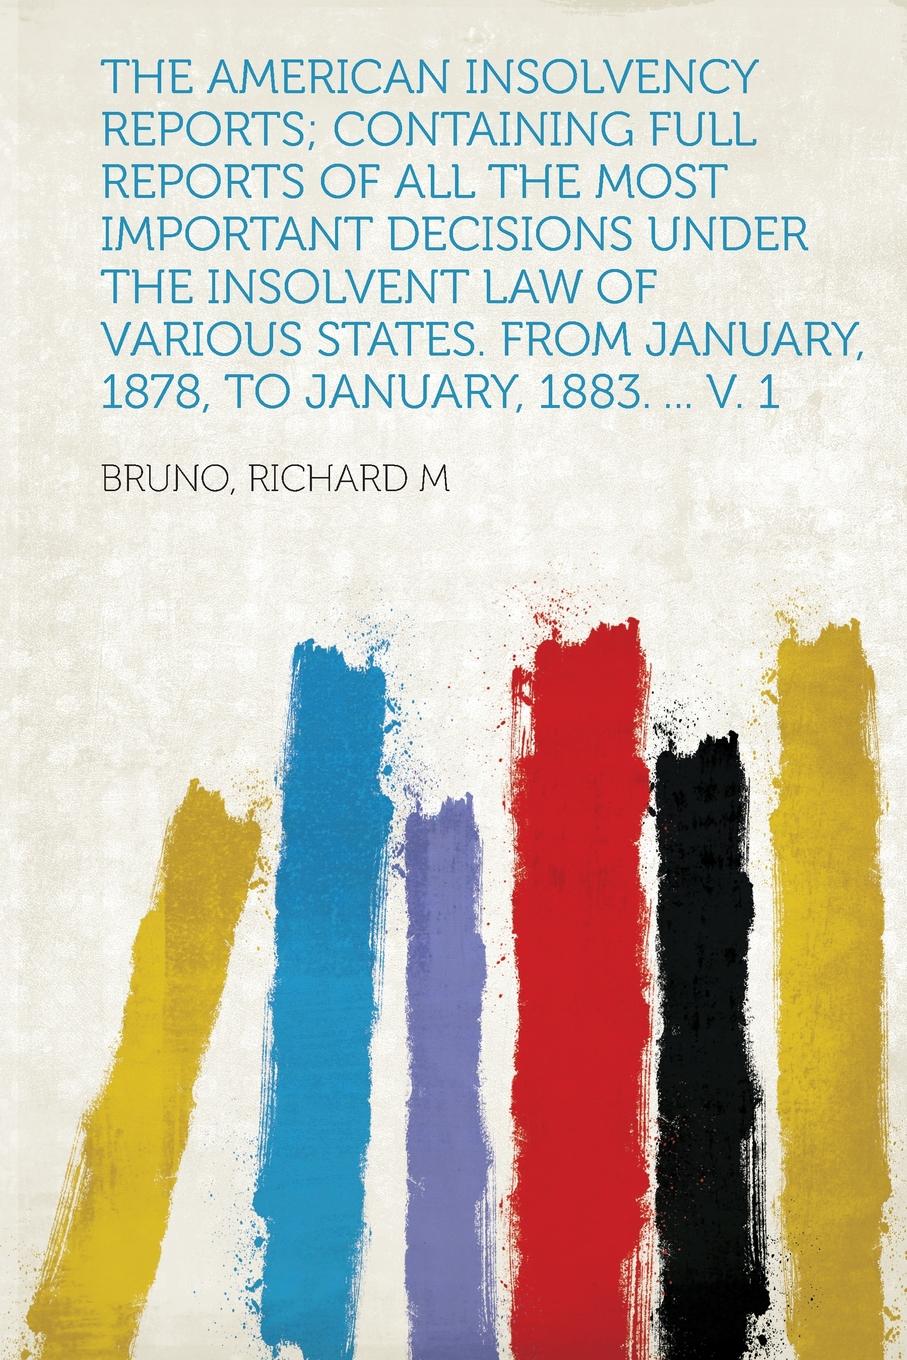 The American Insolvency Reports; Containing Full Reports of All the Most Important Decisions Under the Insolvent Law of Various States. From January, 1878, to January, 1883. ... V. 1